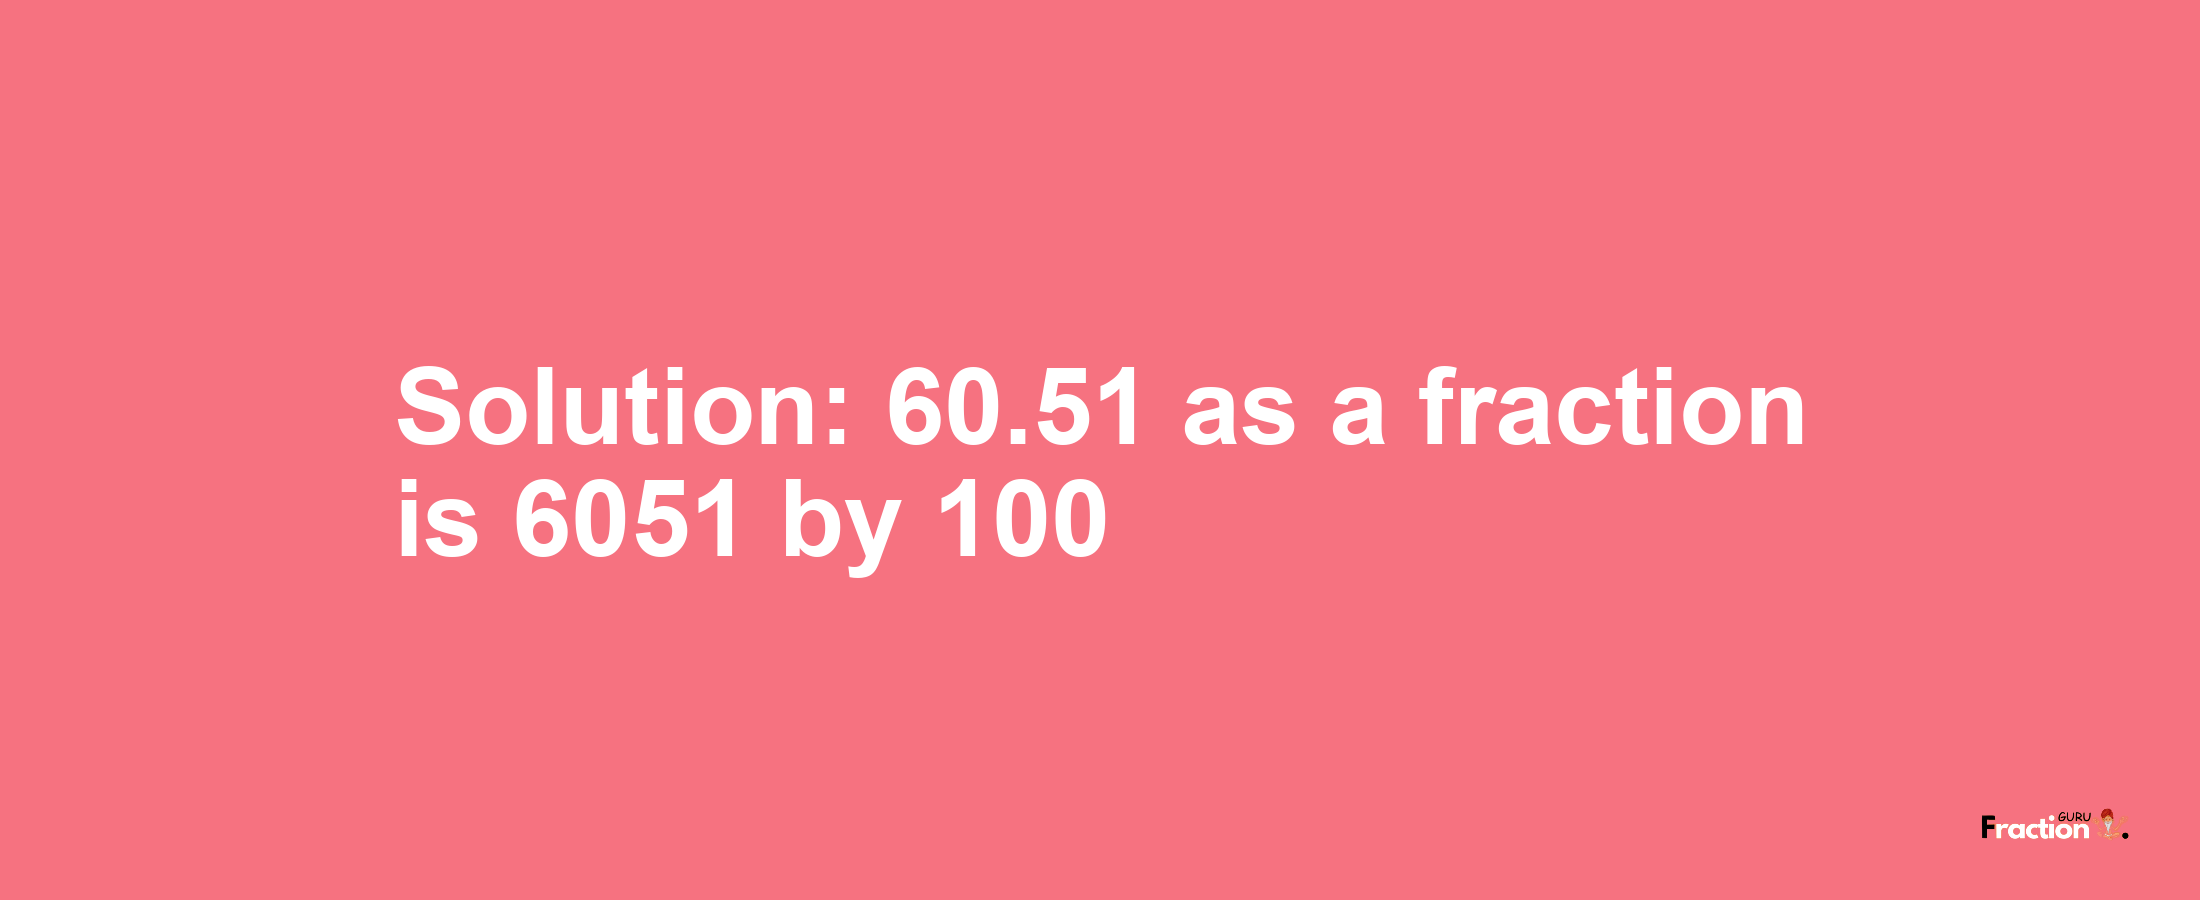 Solution:60.51 as a fraction is 6051/100